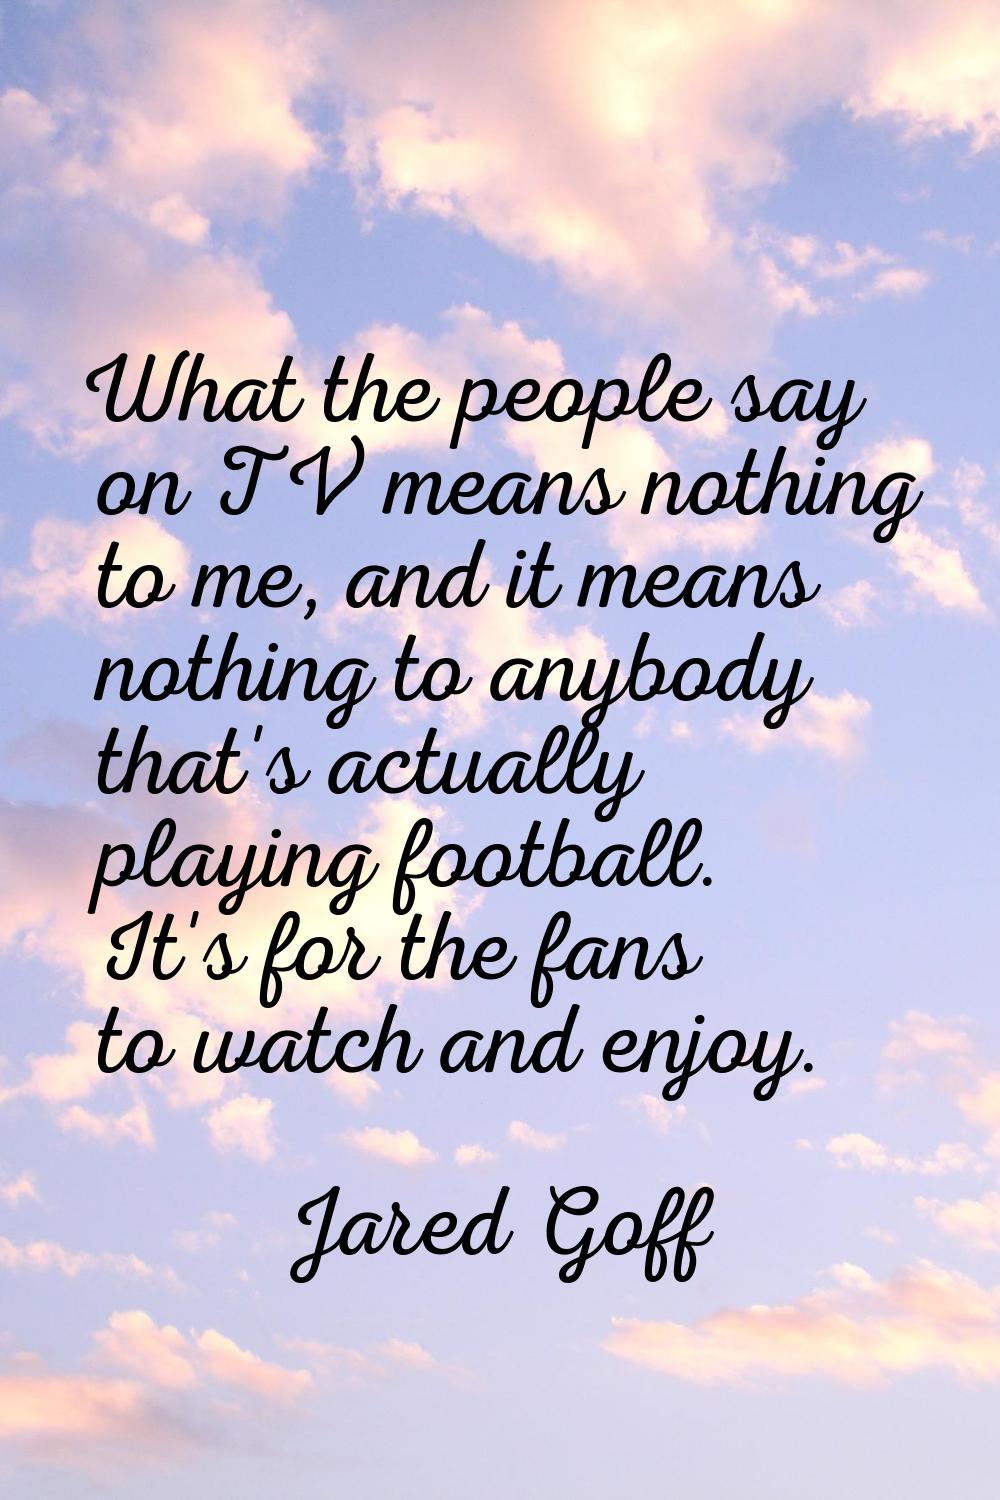 What the people say on TV means nothing to me, and it means nothing to anybody that's actually play